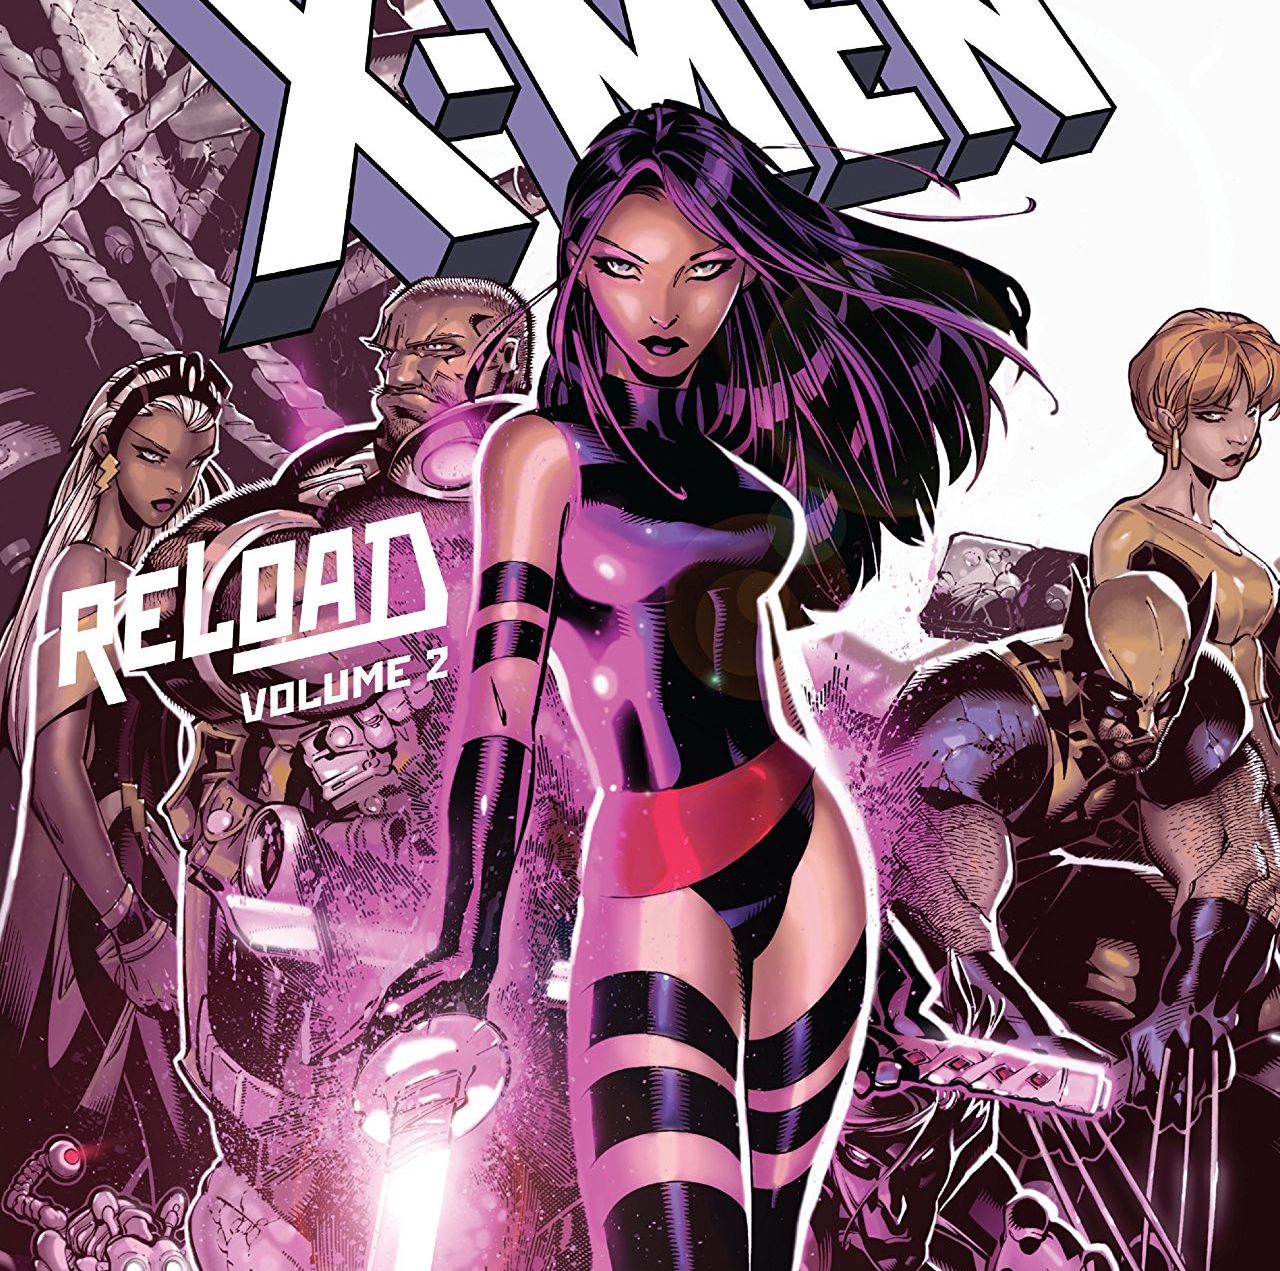 X-Men: Reload by Chris Claremont Vol. 2: House of M Review